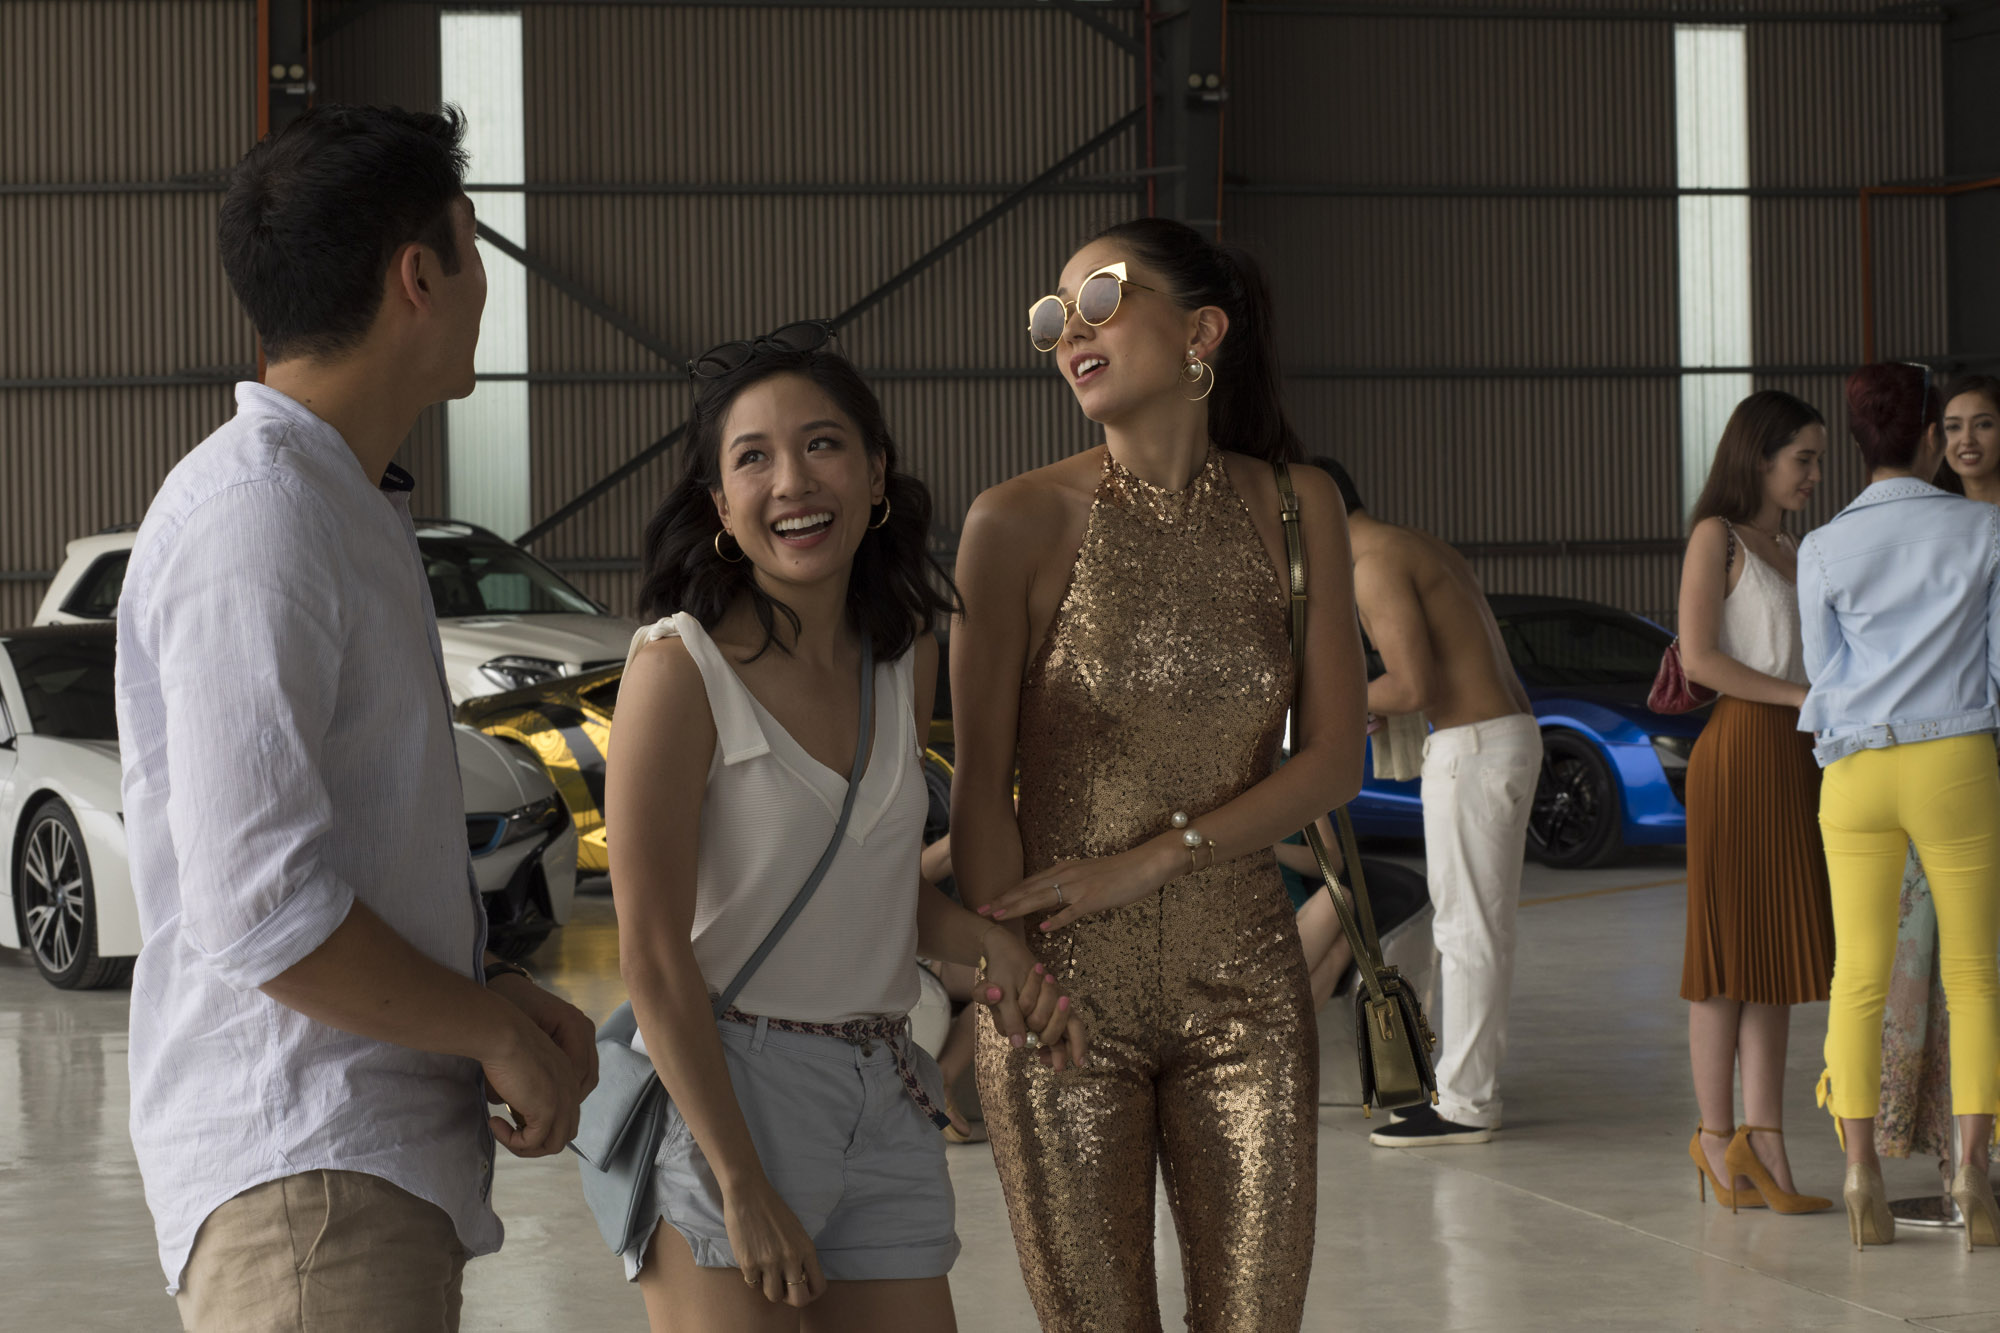 Crazy Rich Asians - The Movie is coming to screens August, 2018